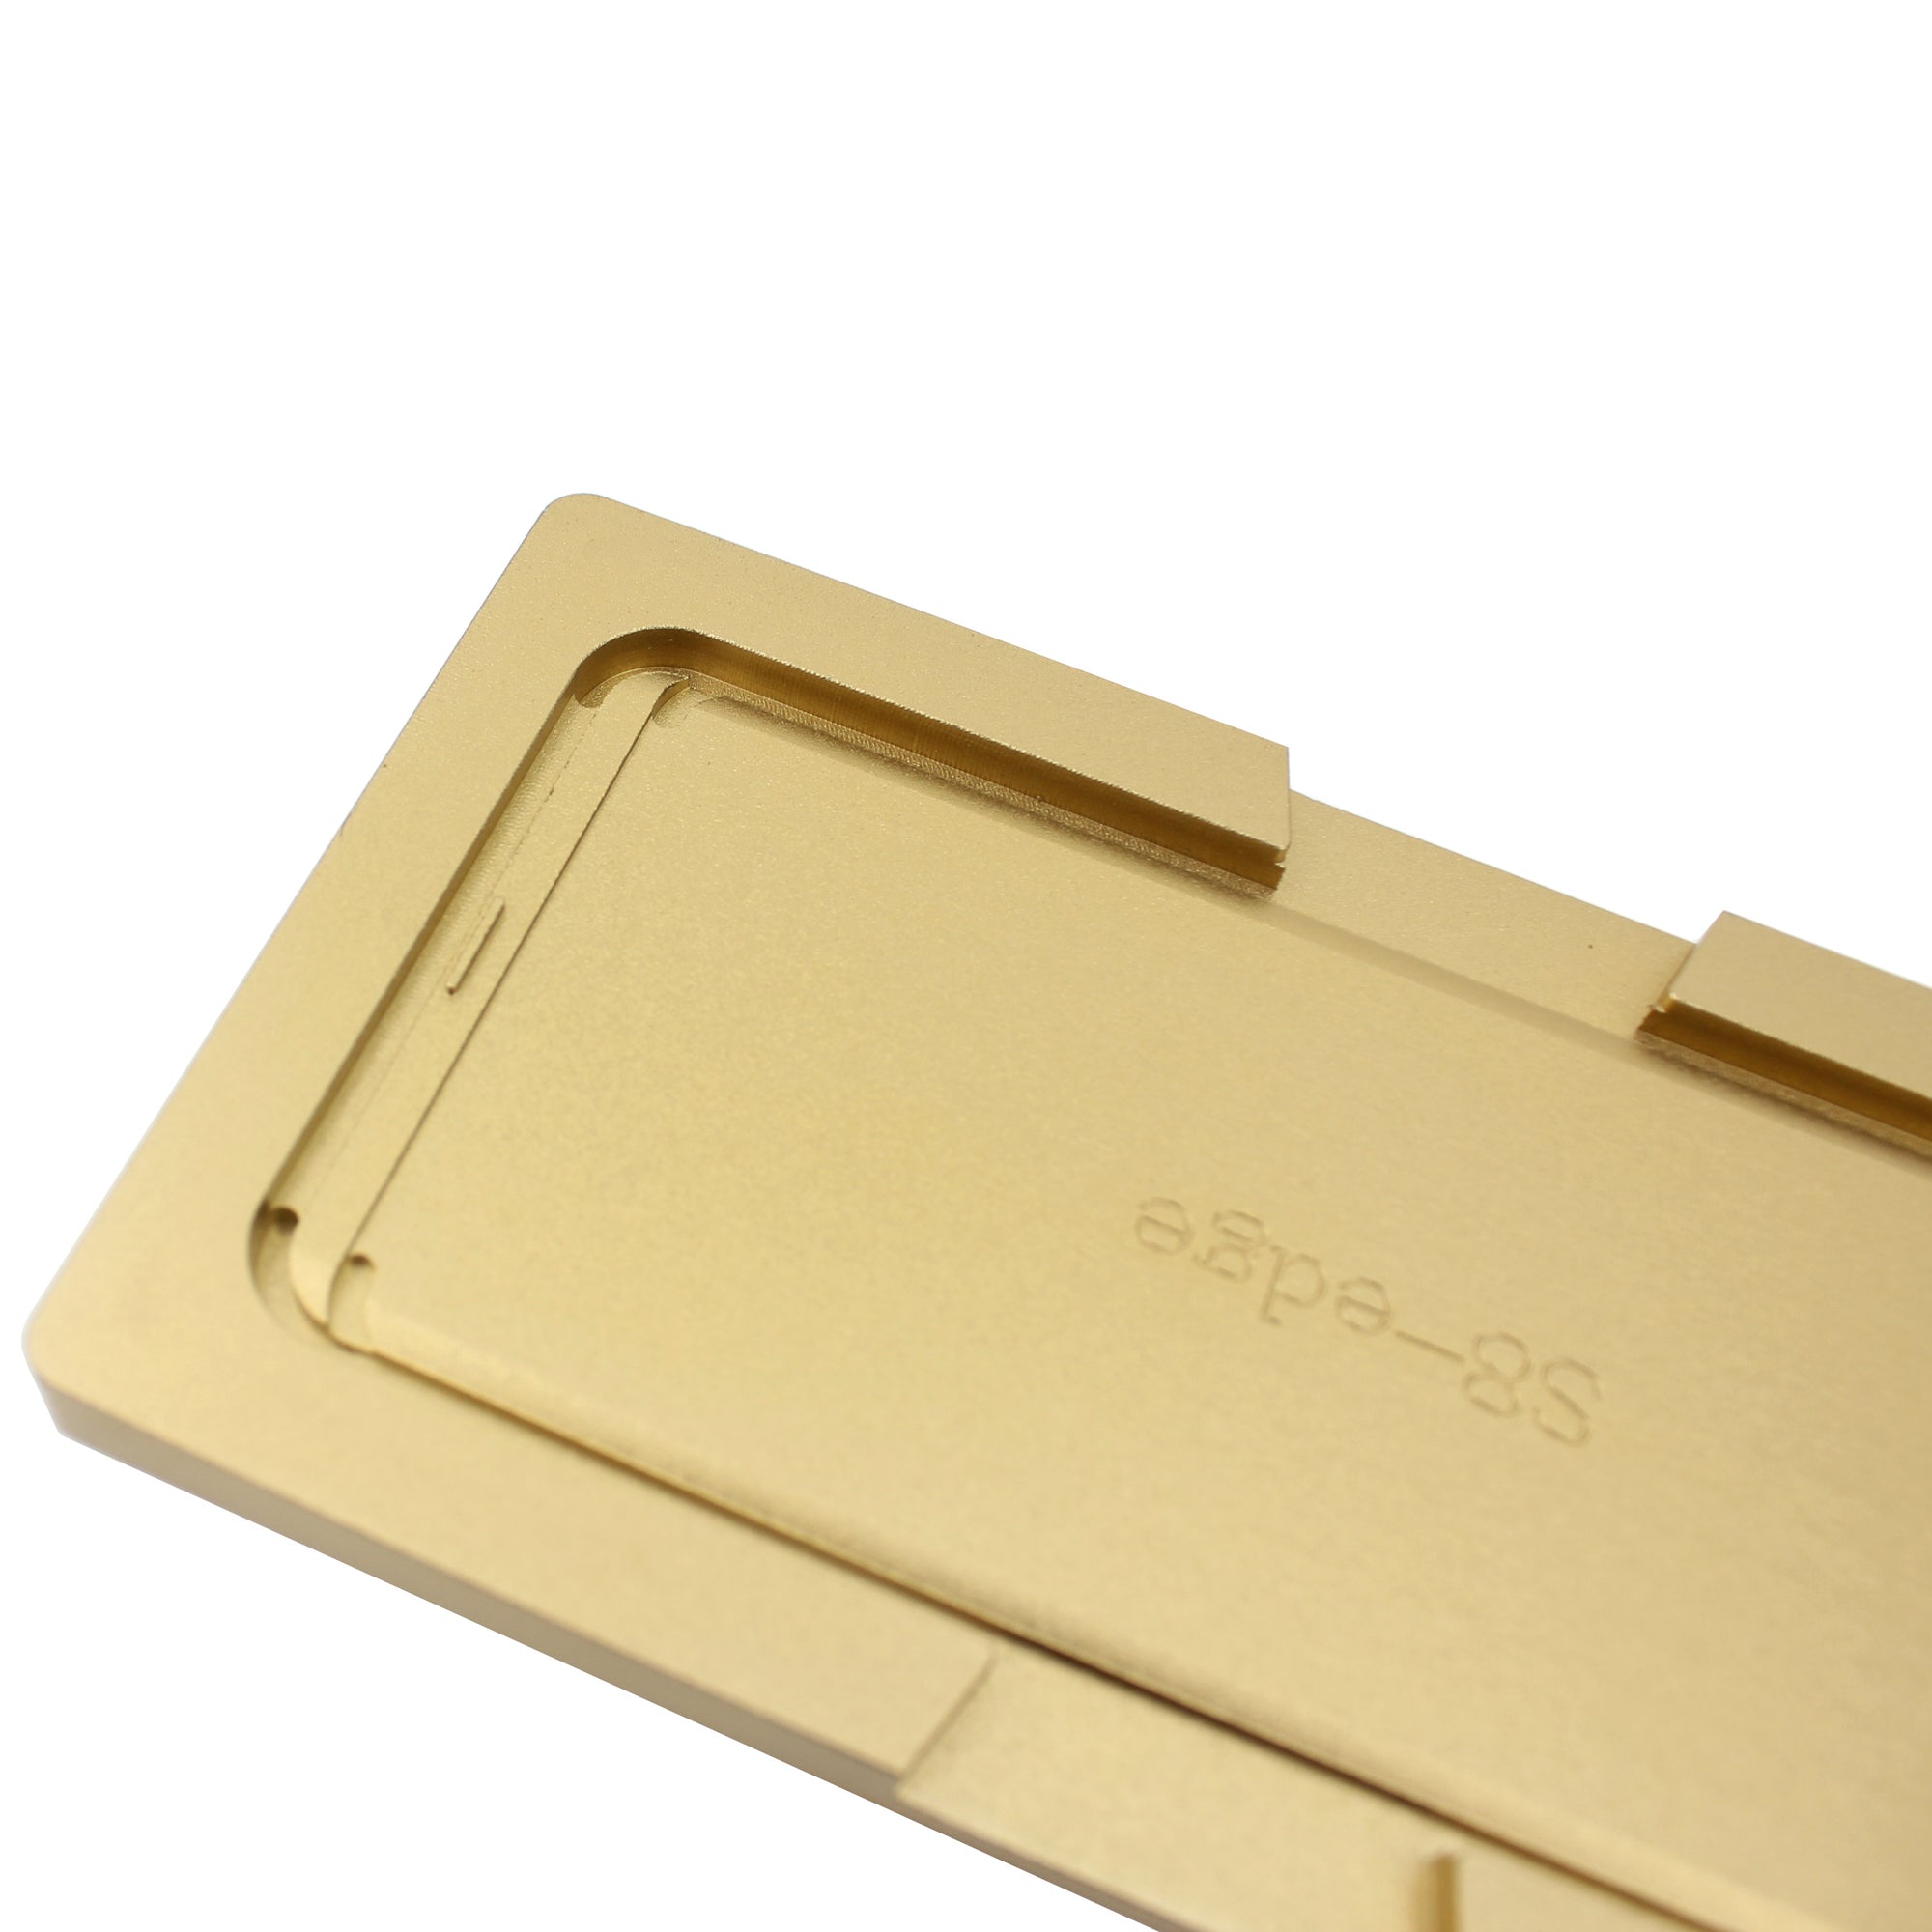 Metal Curved Screen Laminating Aligning Mould for Samsung Galaxy S8 SM-G950 - Gold Color